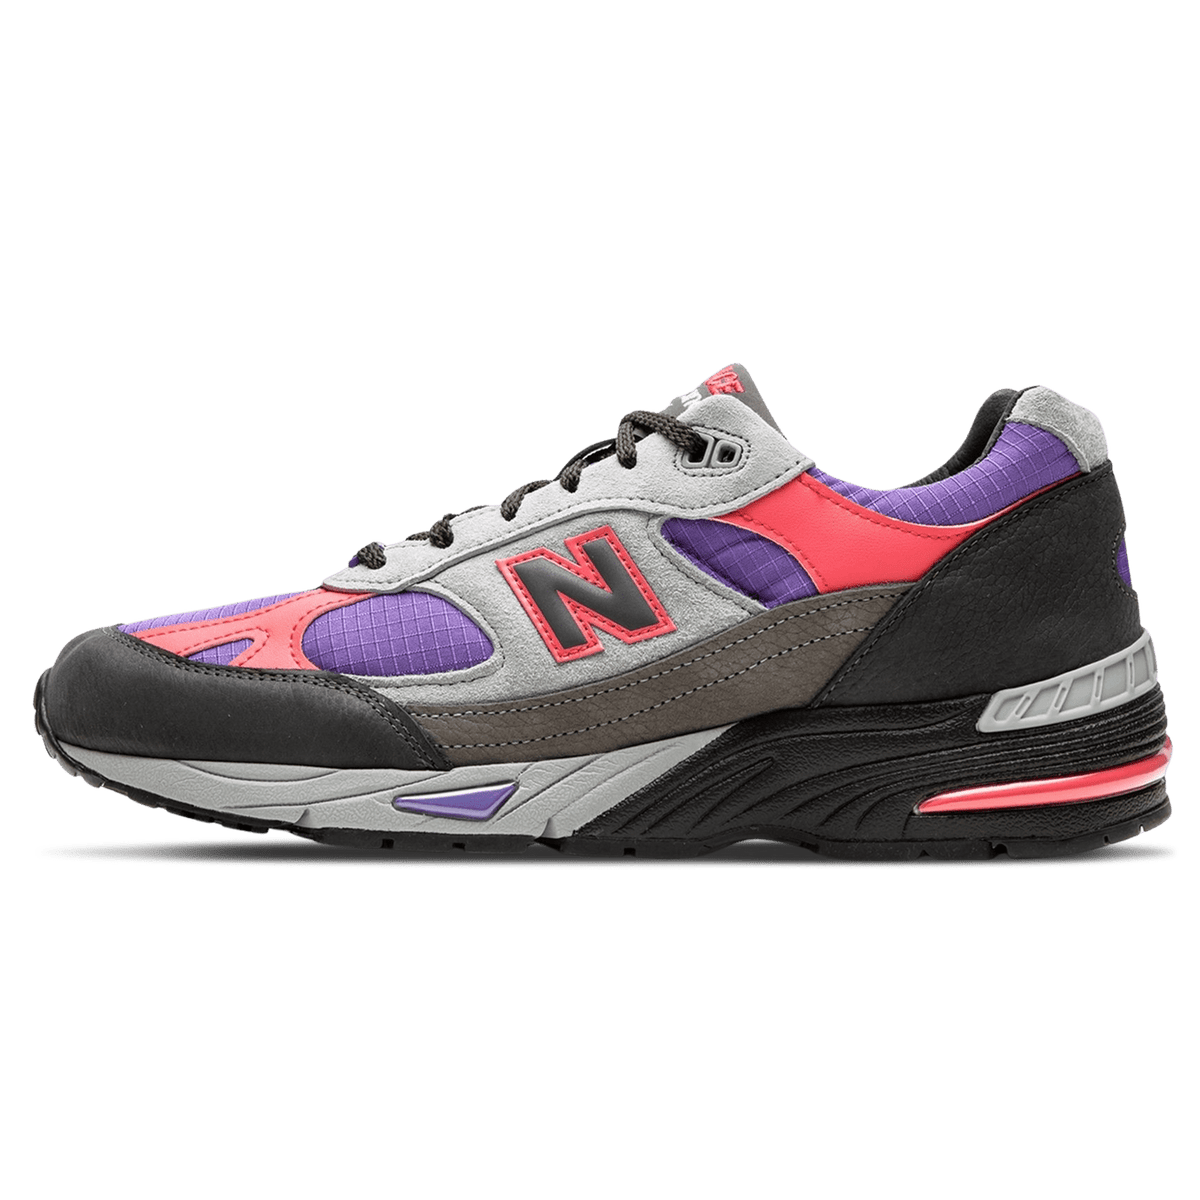 Palace x New Balance 991 Made in England 'Black Ultra Violet' - CerbeShops